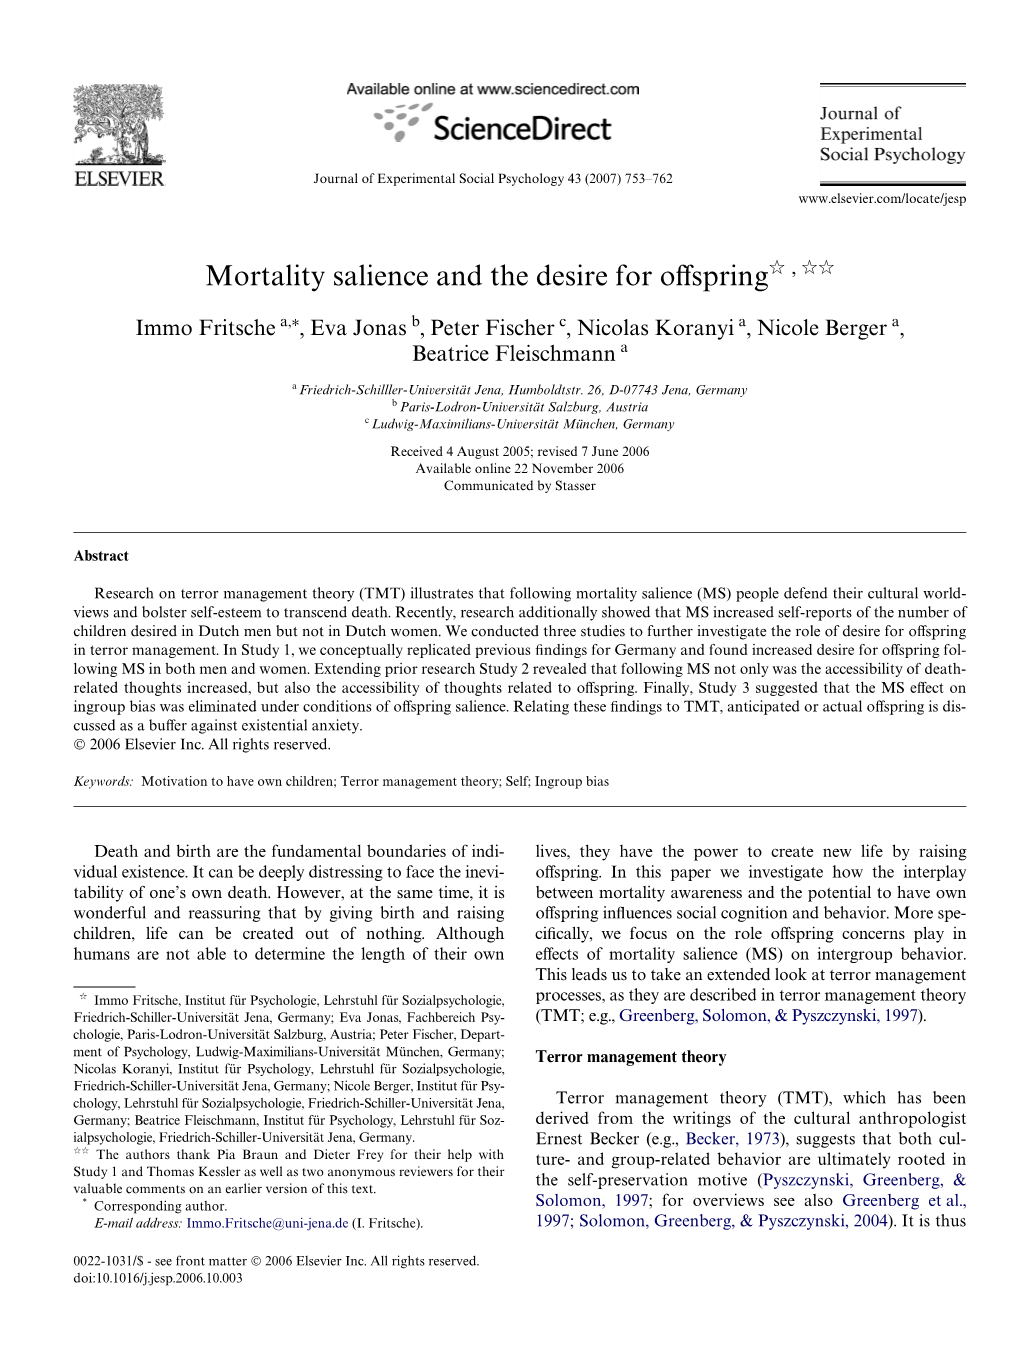 Mortality Salience and the Desire for Offspring